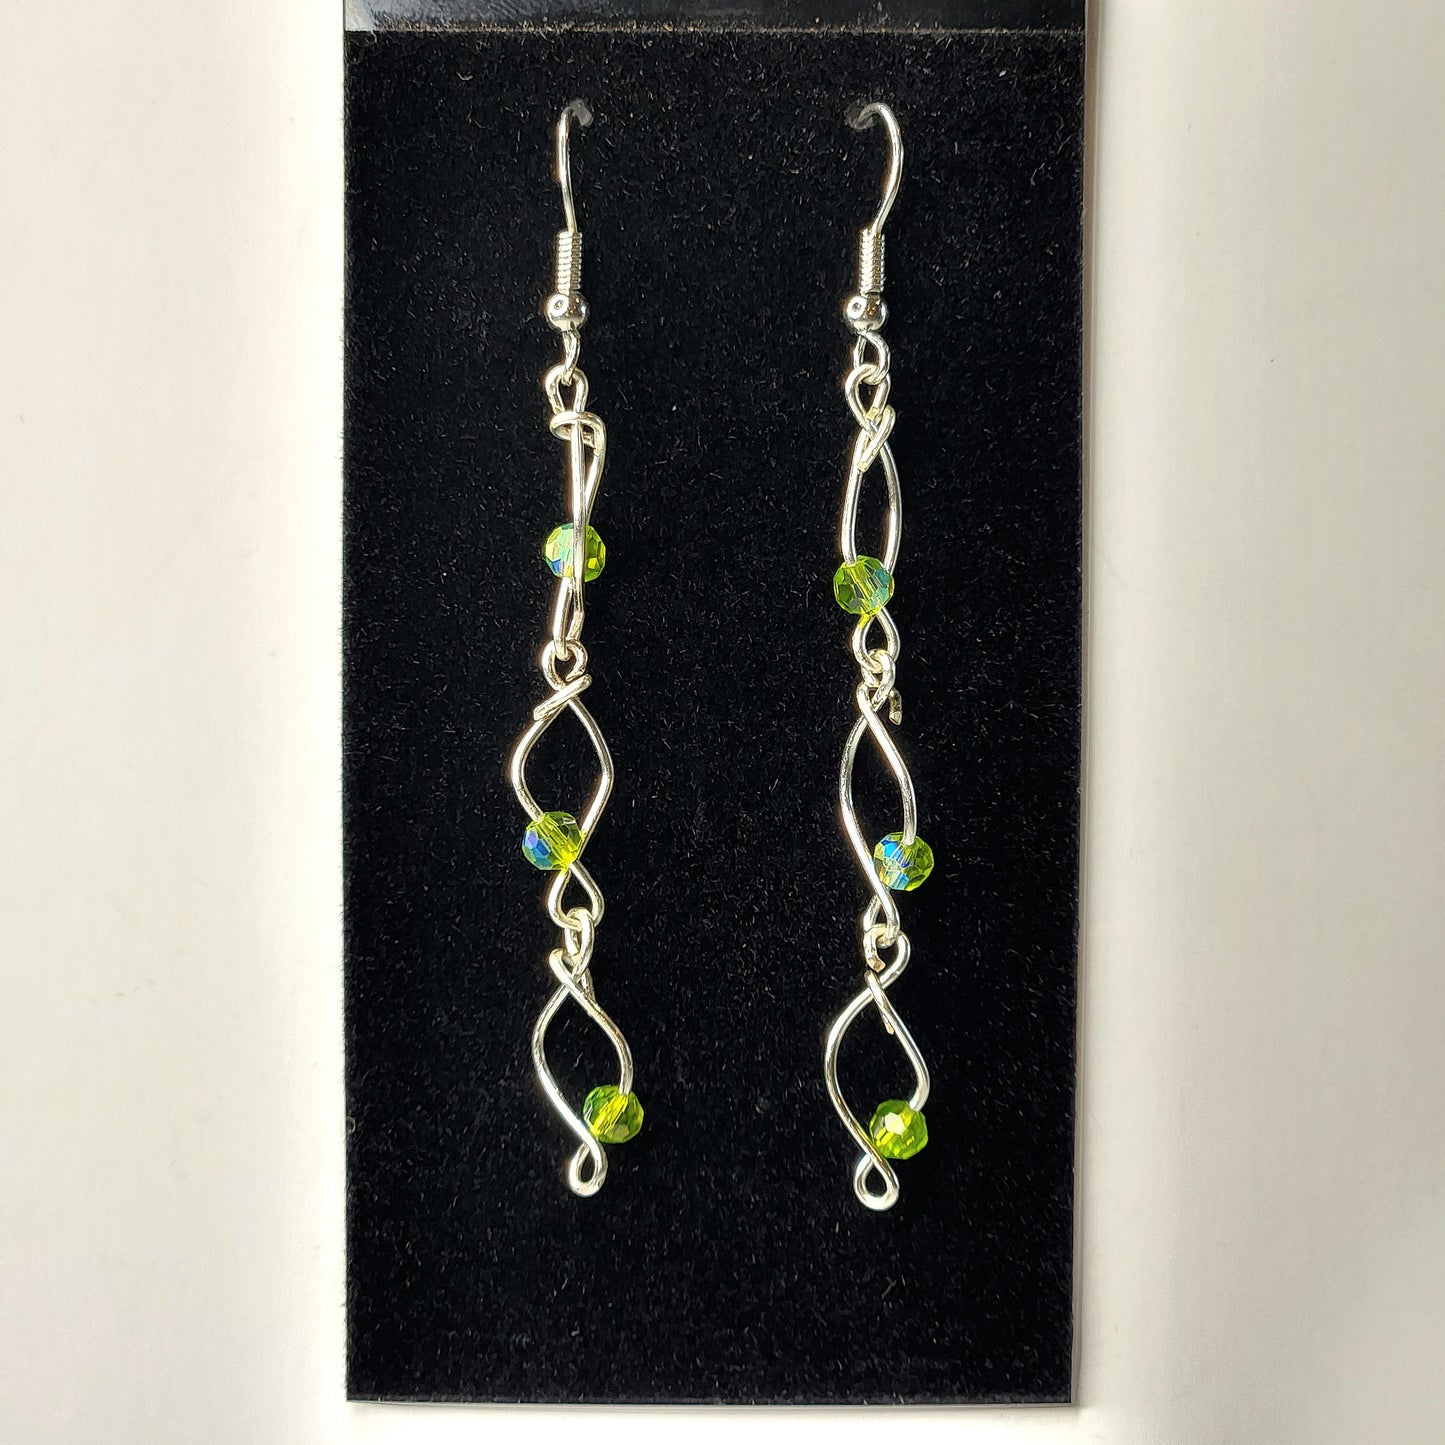 Hand Wired Earrings with Gems